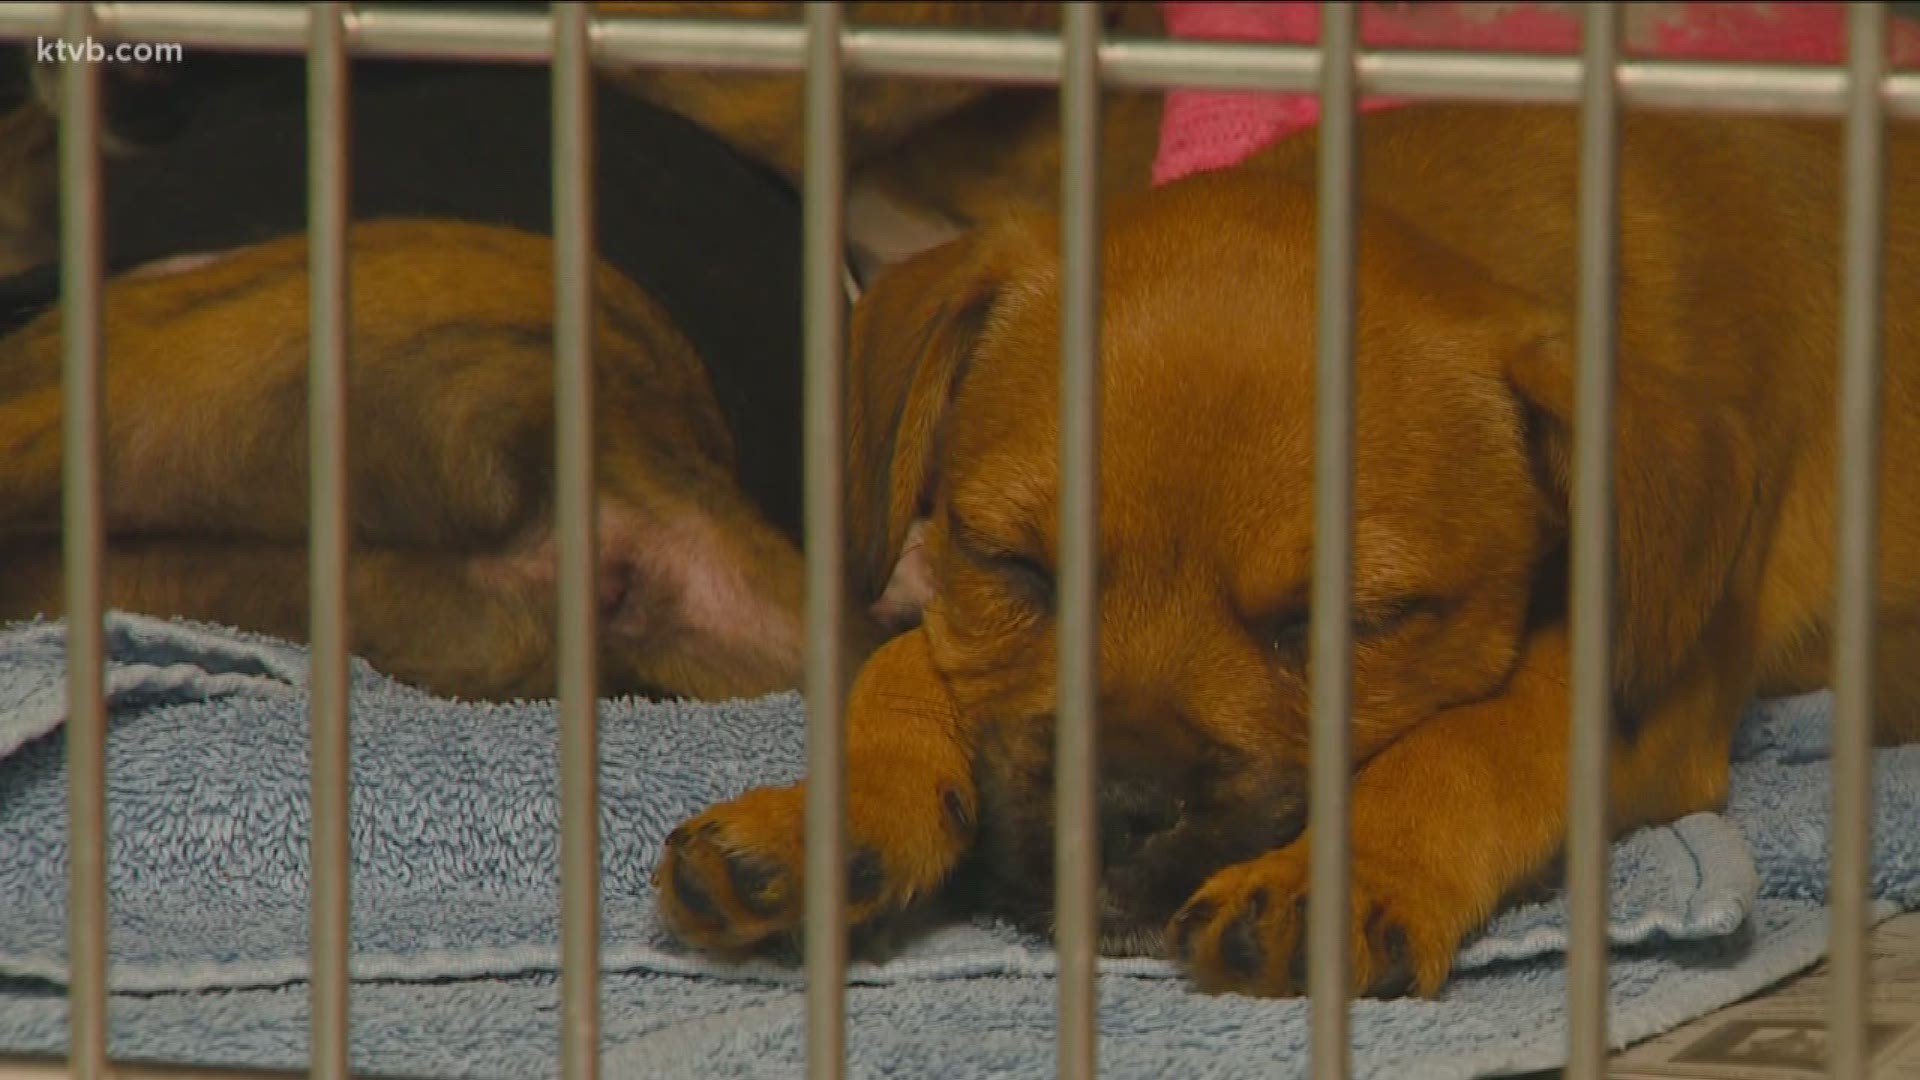 The Cabela's parking lot at Milwaukee and Franklin roads has been a popular destination for dog breeders to set up shop but now breeders are banned after one puppy died from parvo.